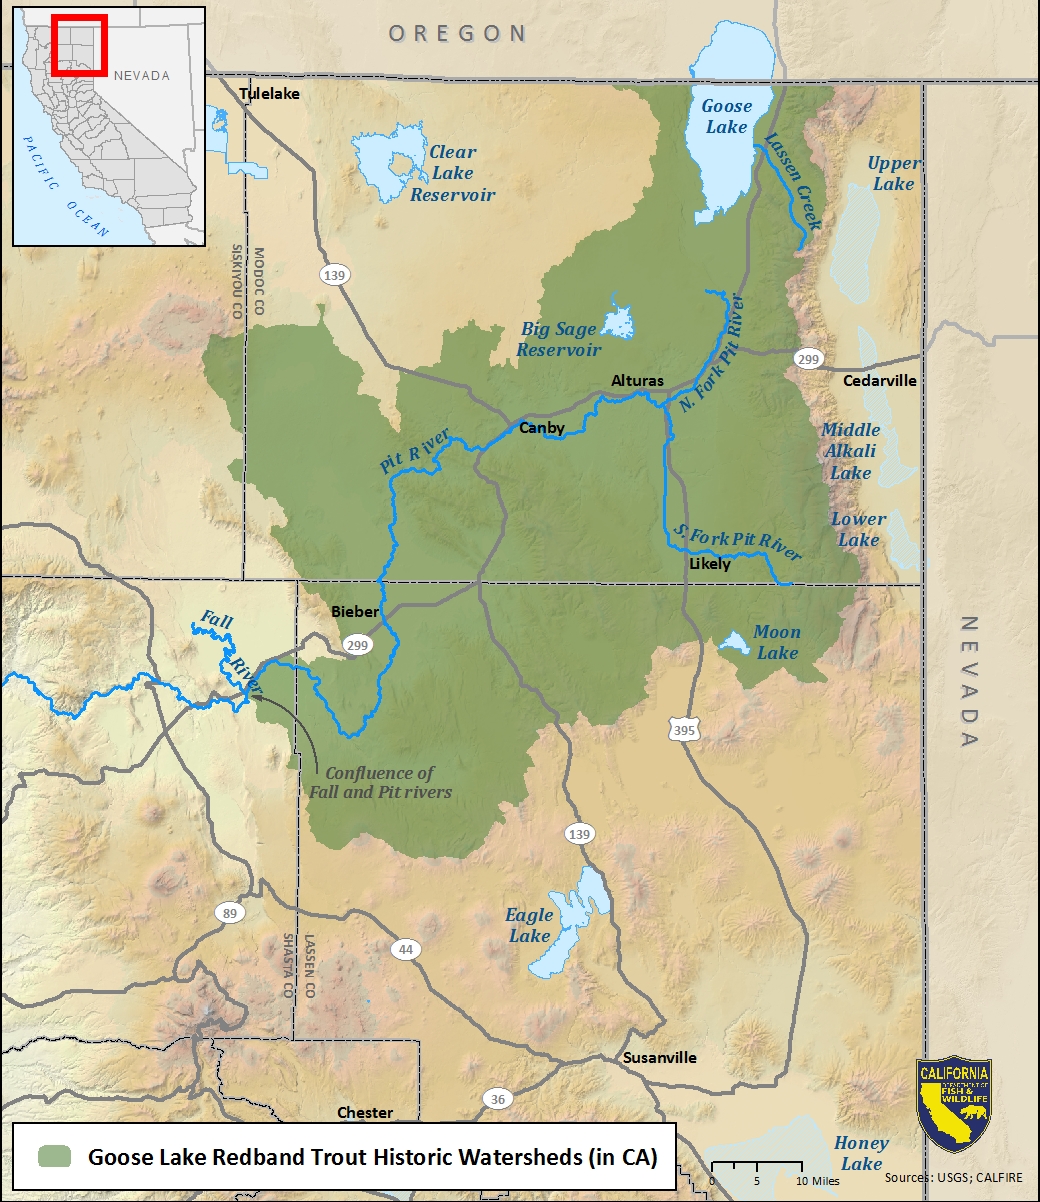 Map of Goose Lake redband trout historic watersheds - click to enlarge in new window